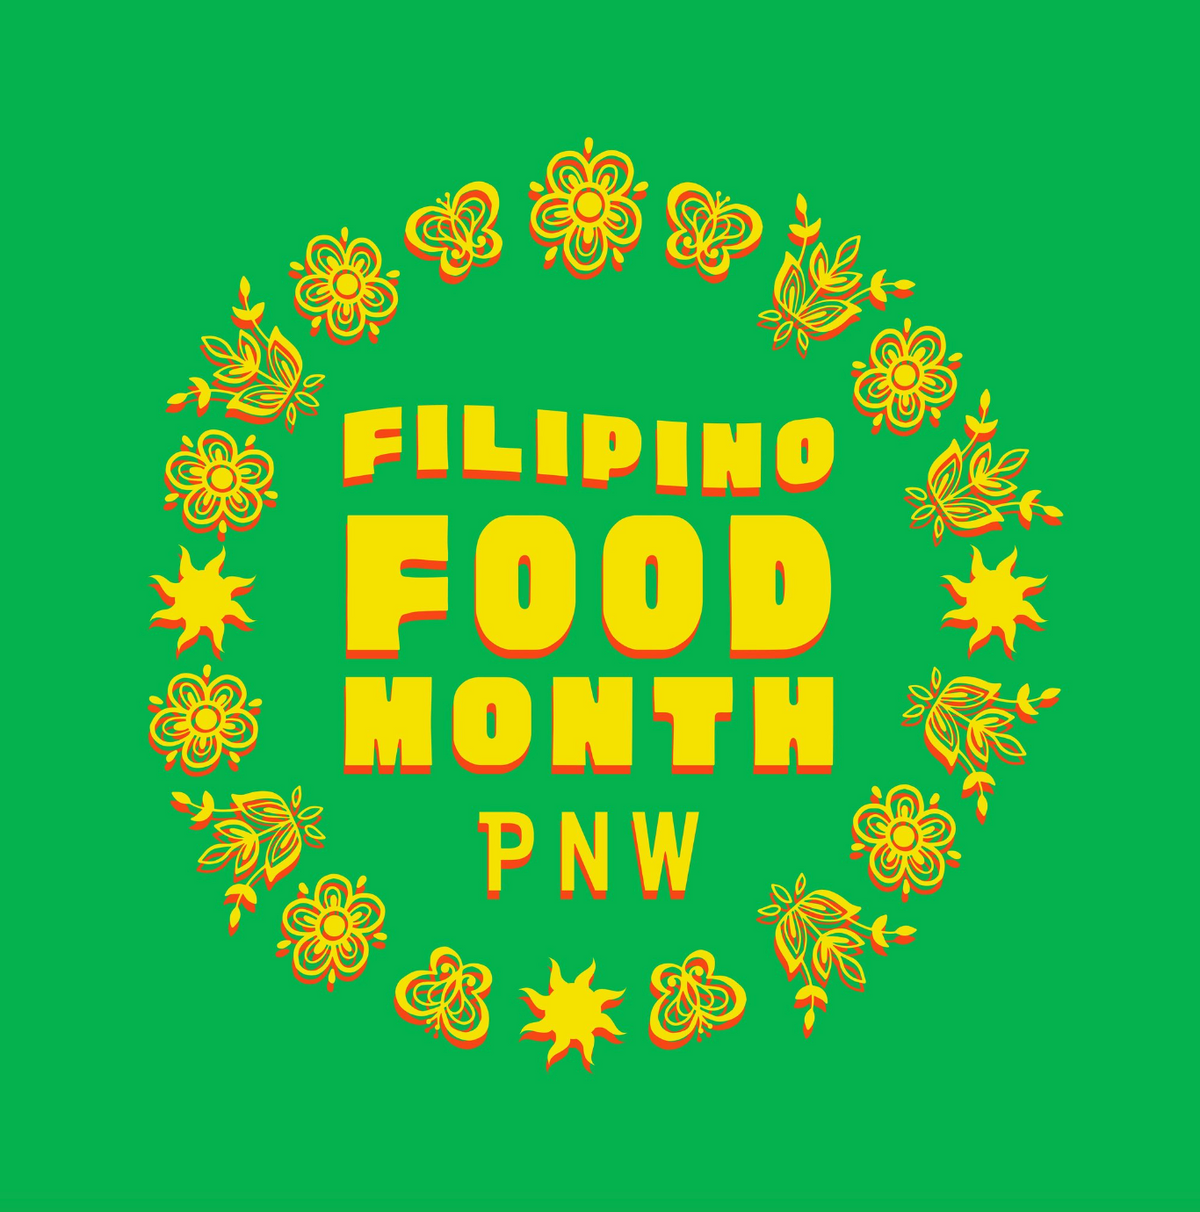 Filipino Food Month Presents Sobrang Sarap Every Day Through April 30 Everout Portland 7558